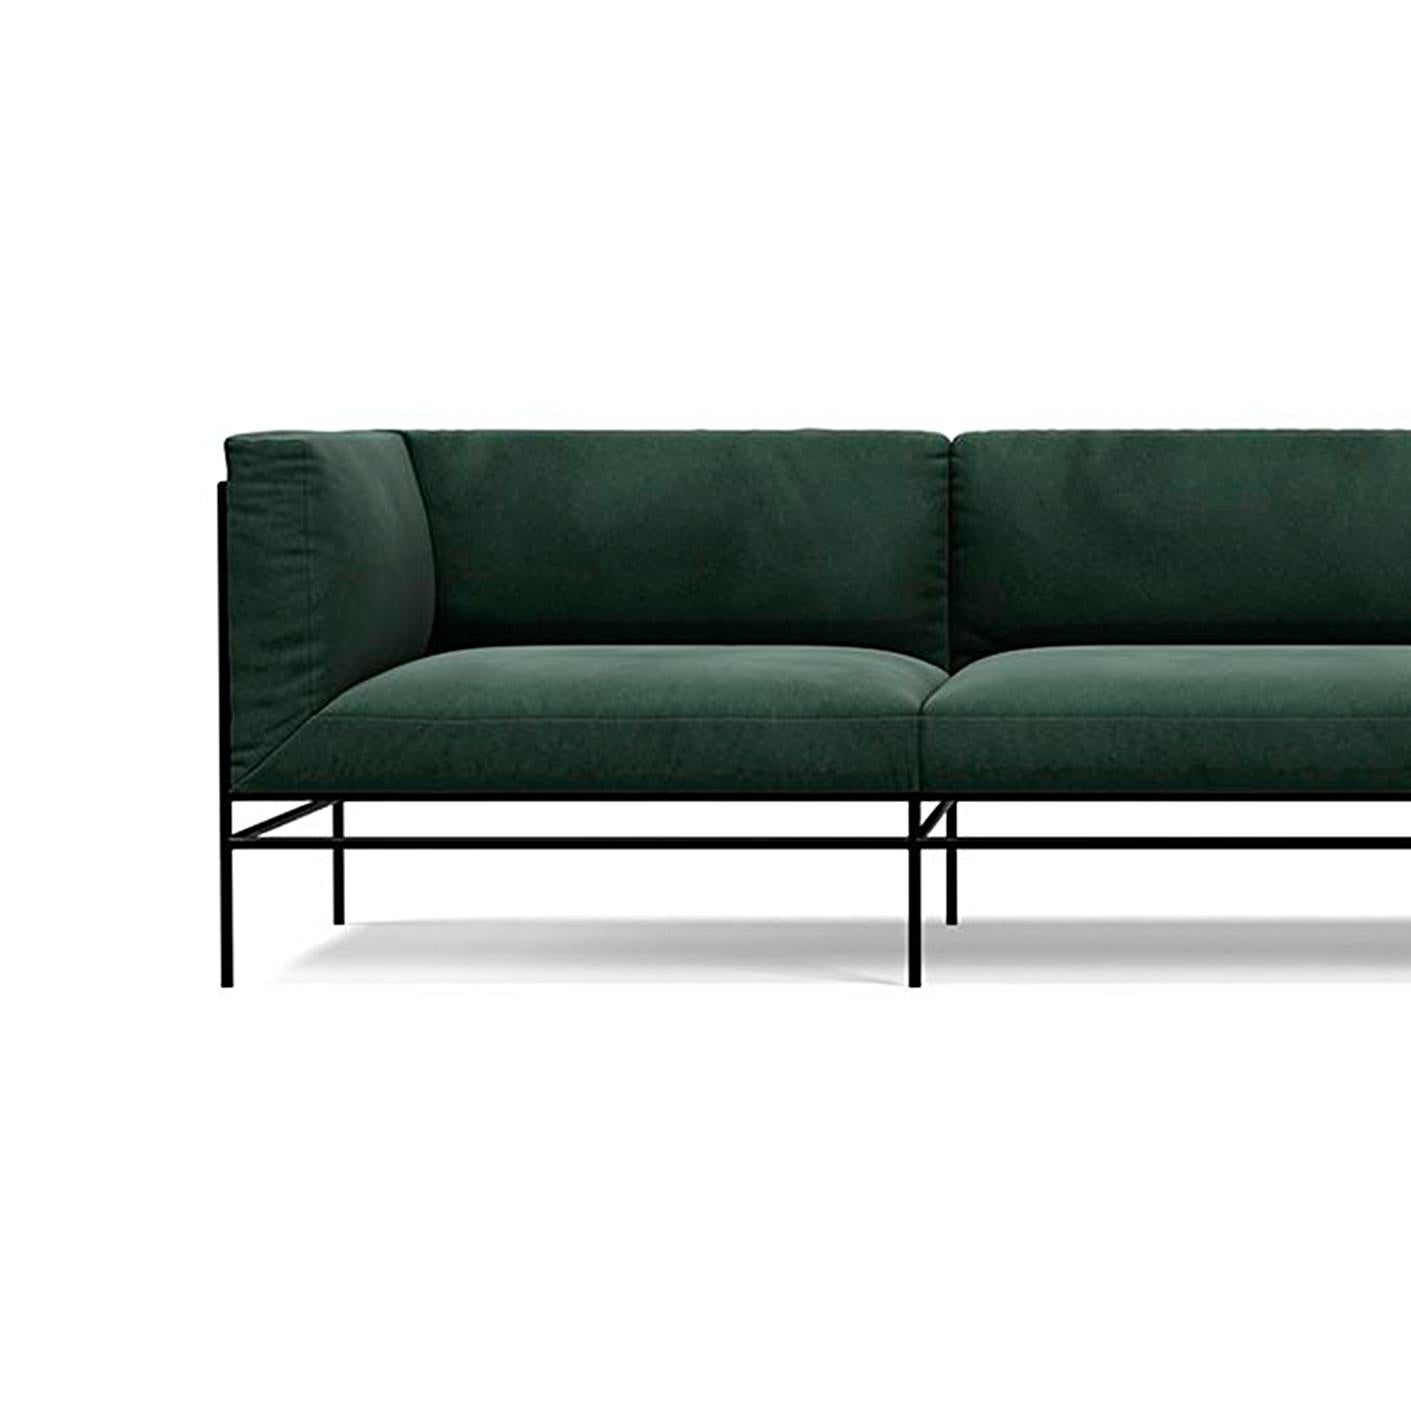 'Middleweight' three seater by Michael Anastassiades for Karakter

Middleweight is Michael Anastassiades’ very first upholstered piece of furniture. The piece captures the best of two worlds, the Italian super lounge sofa on one side and the compact